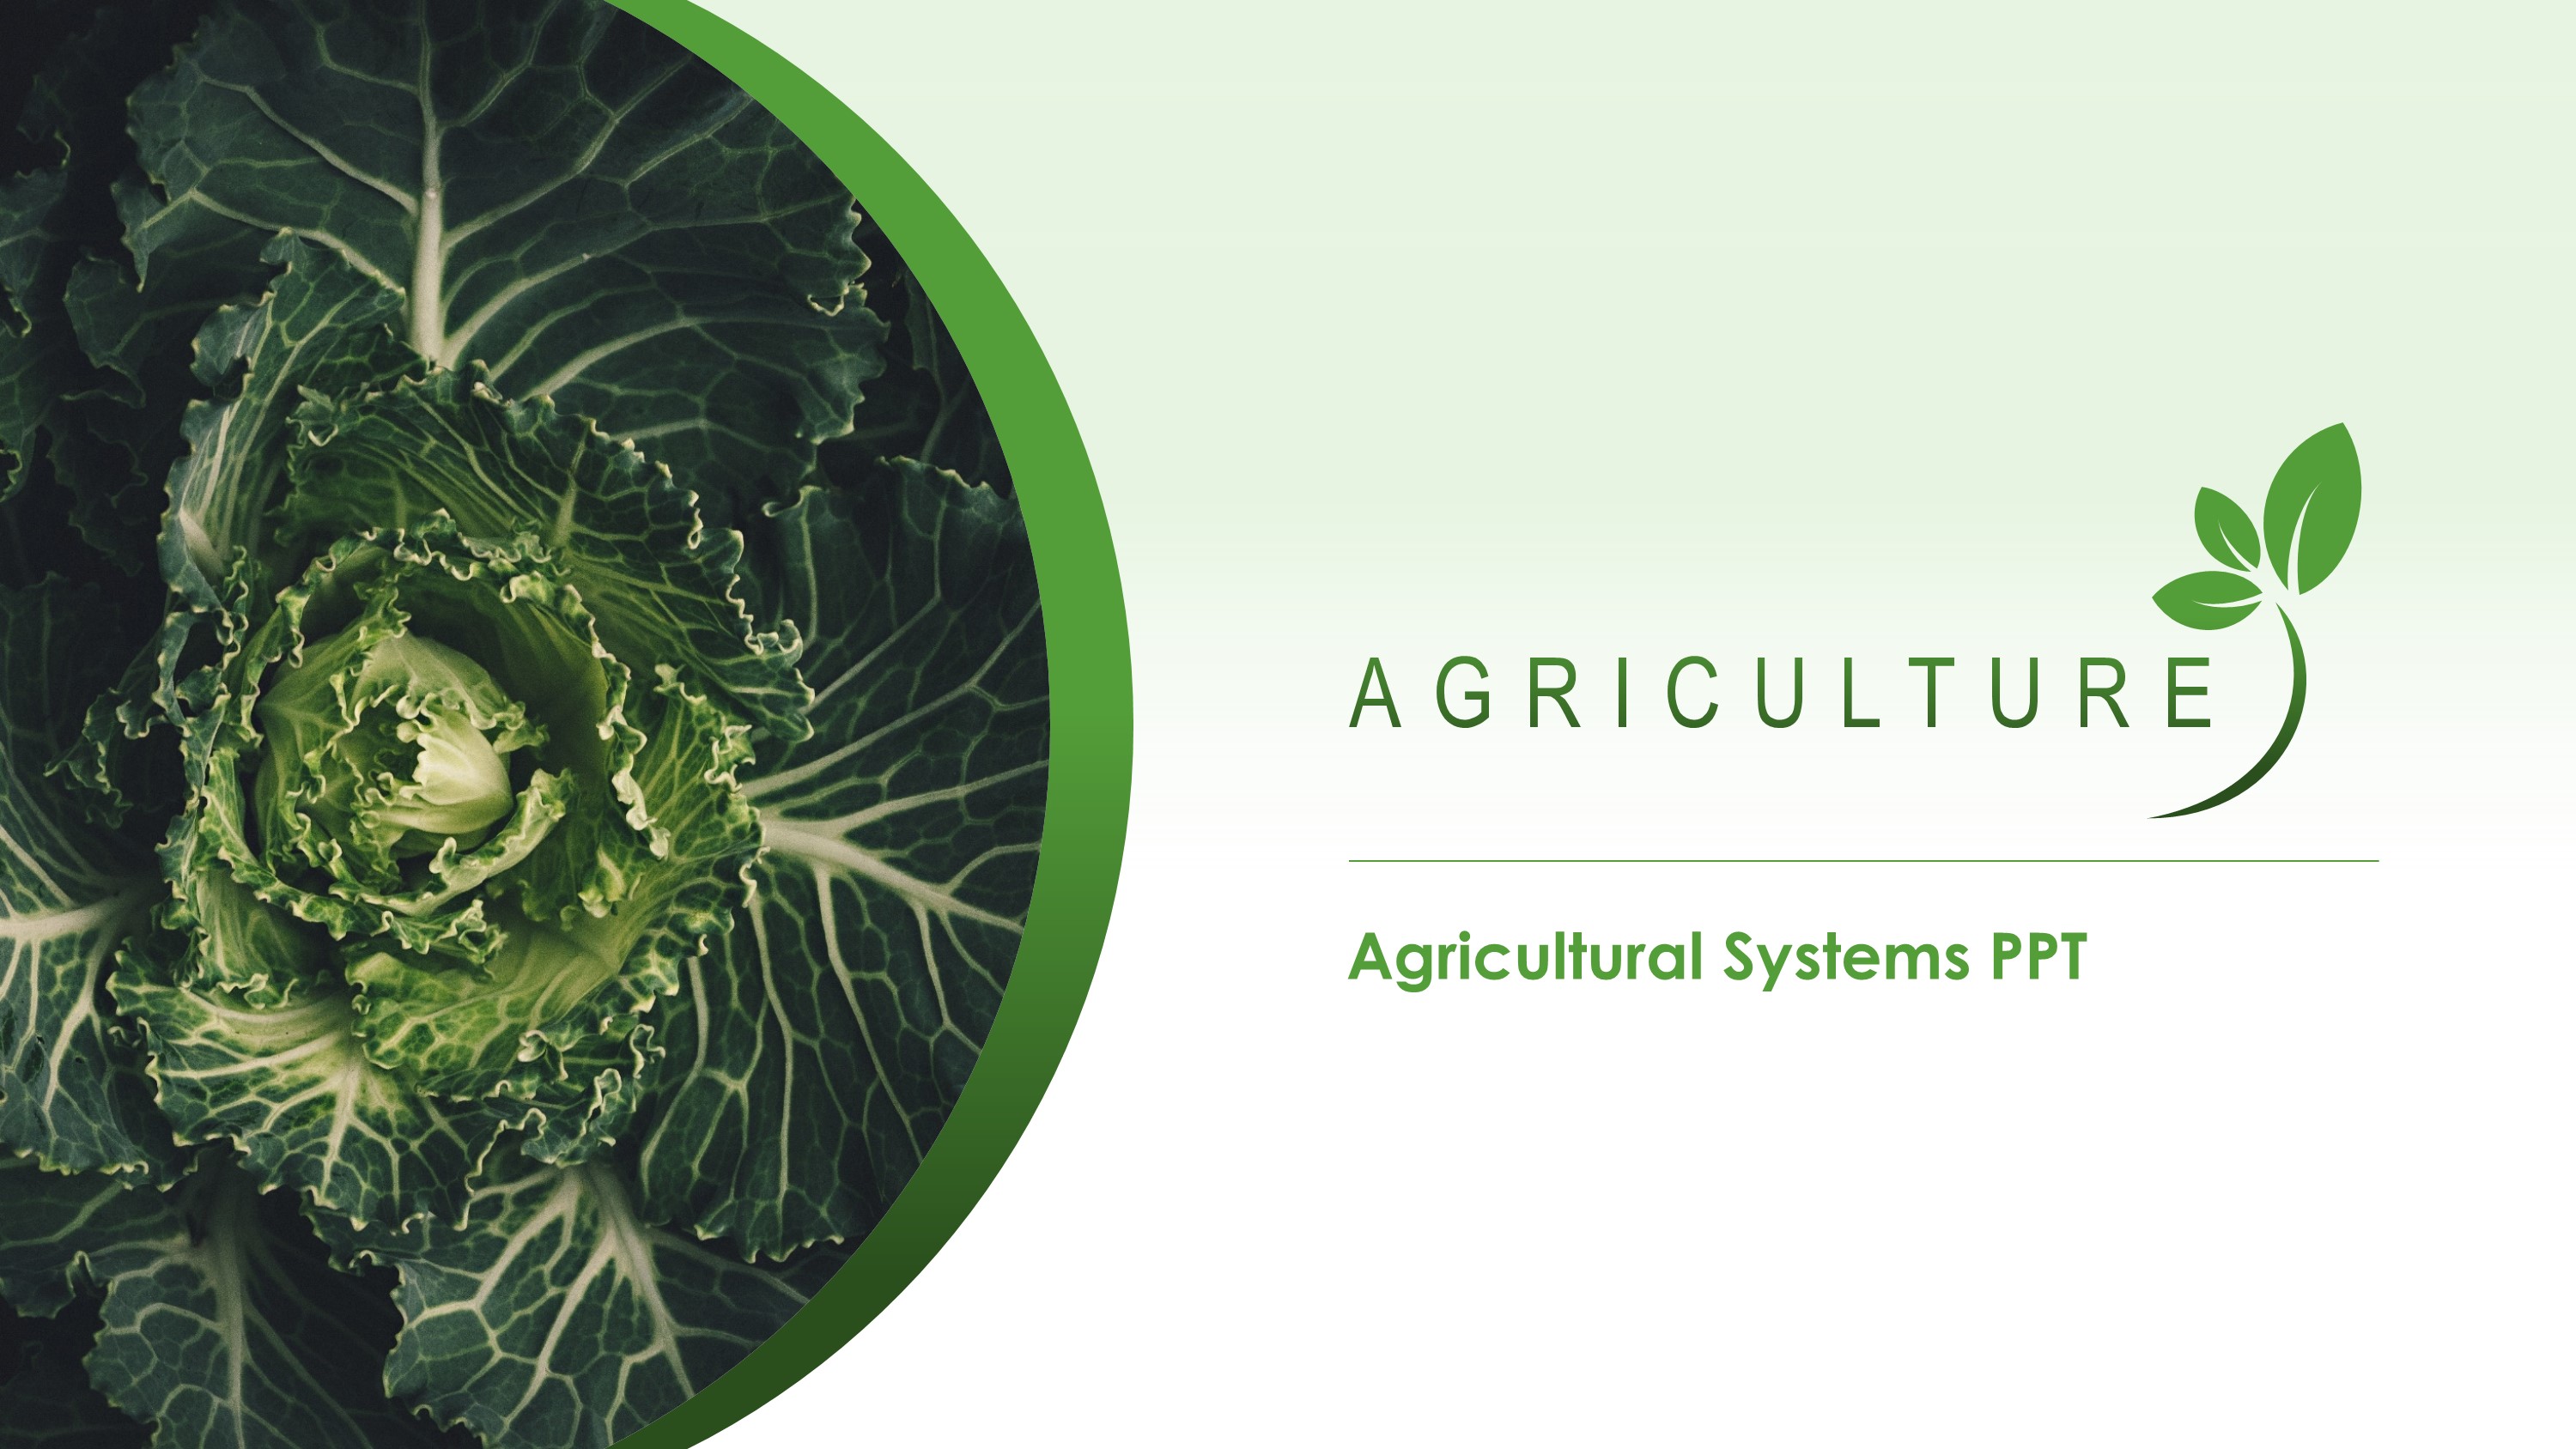 Agriculture Powerpoint Presentation Templates Free Download Free